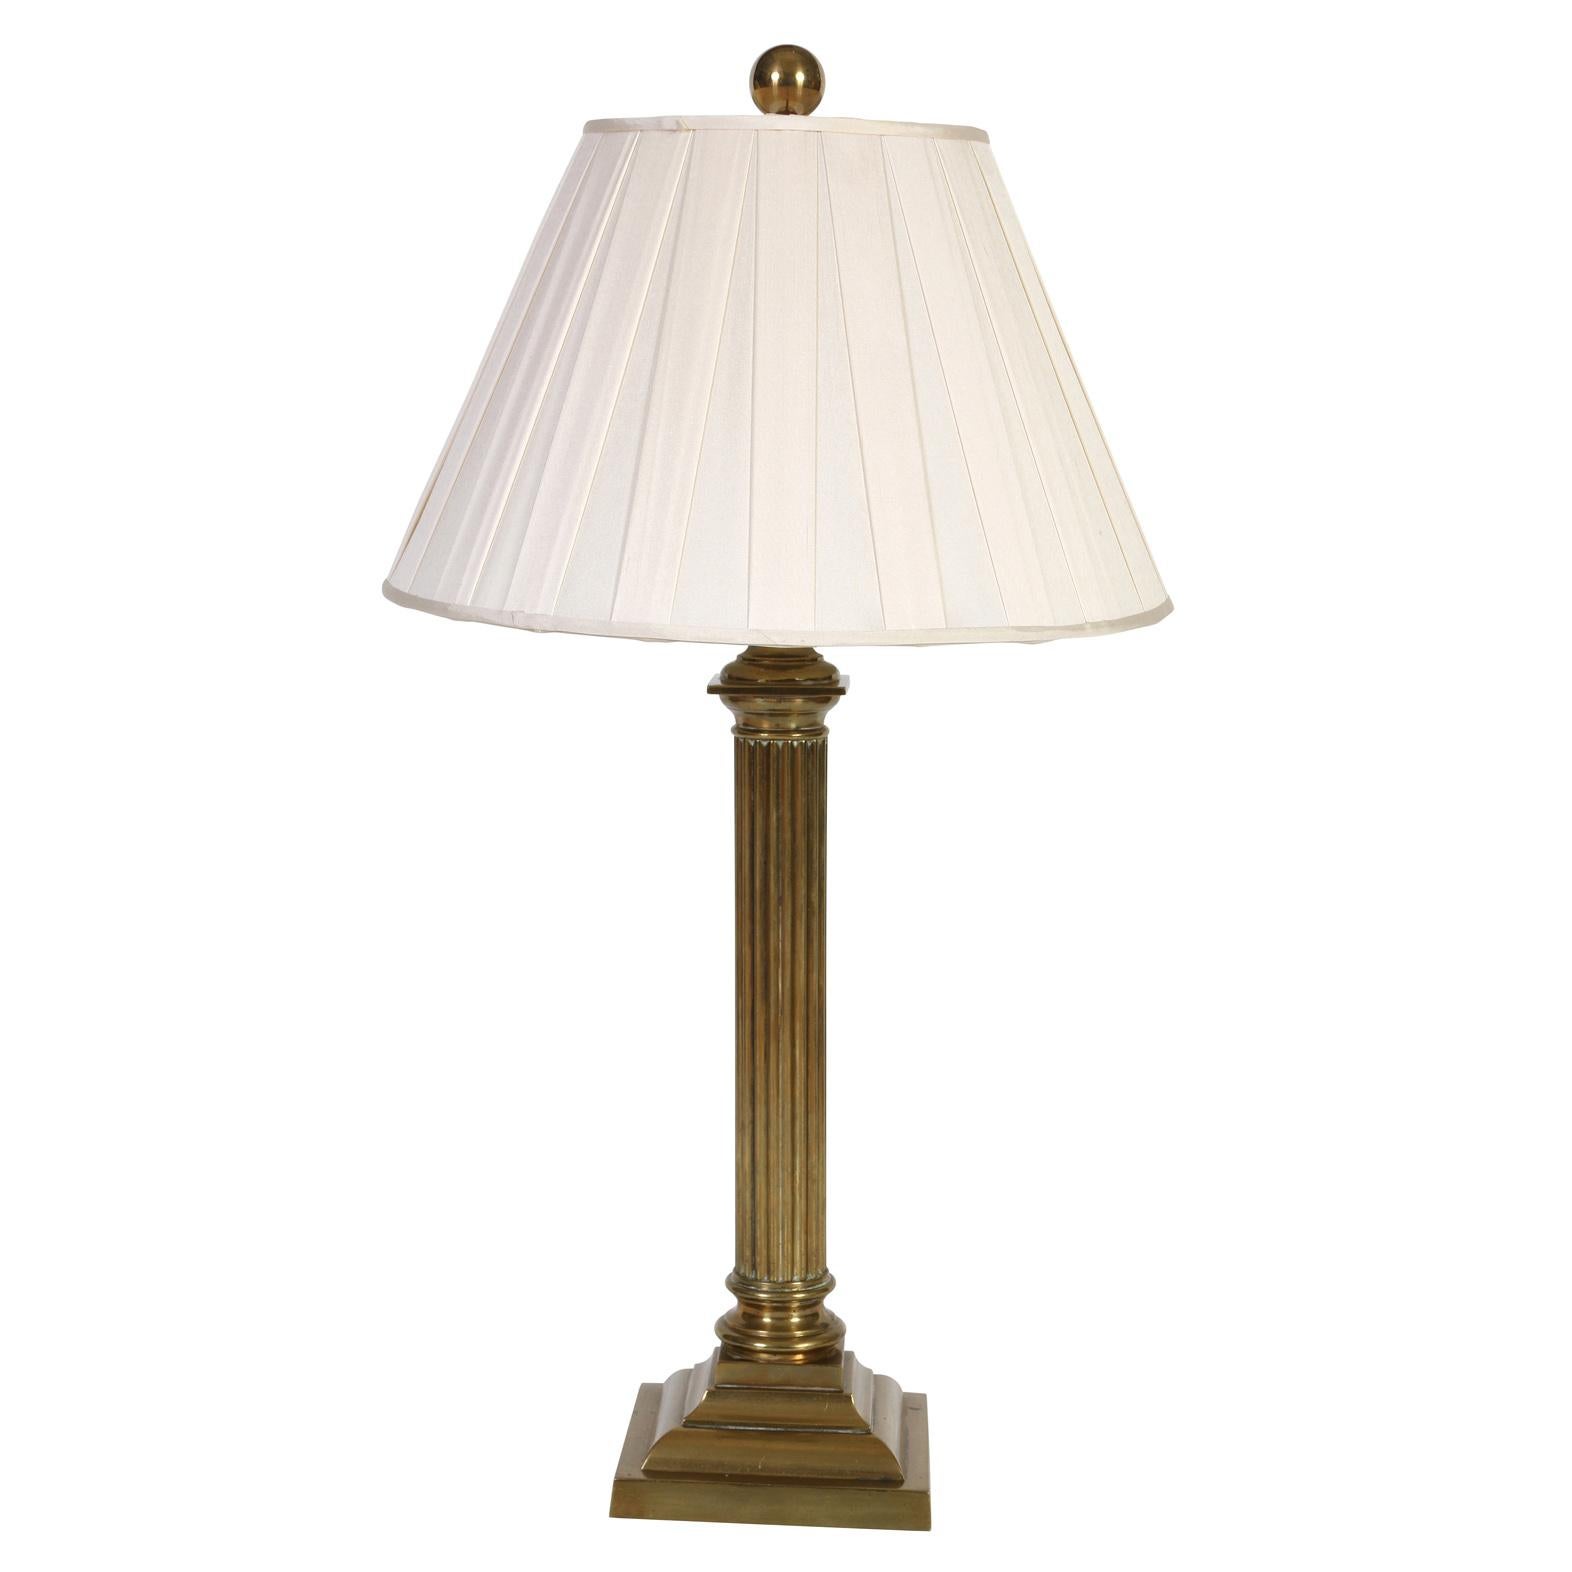 An almost pair of vintage brass column lamps and pleated ivory shades.  One lamp features a doric column and the other is a corinthian column.  Both brass lamps have a ribbed column with a square stacked base.  A classical pair of lamps add polish